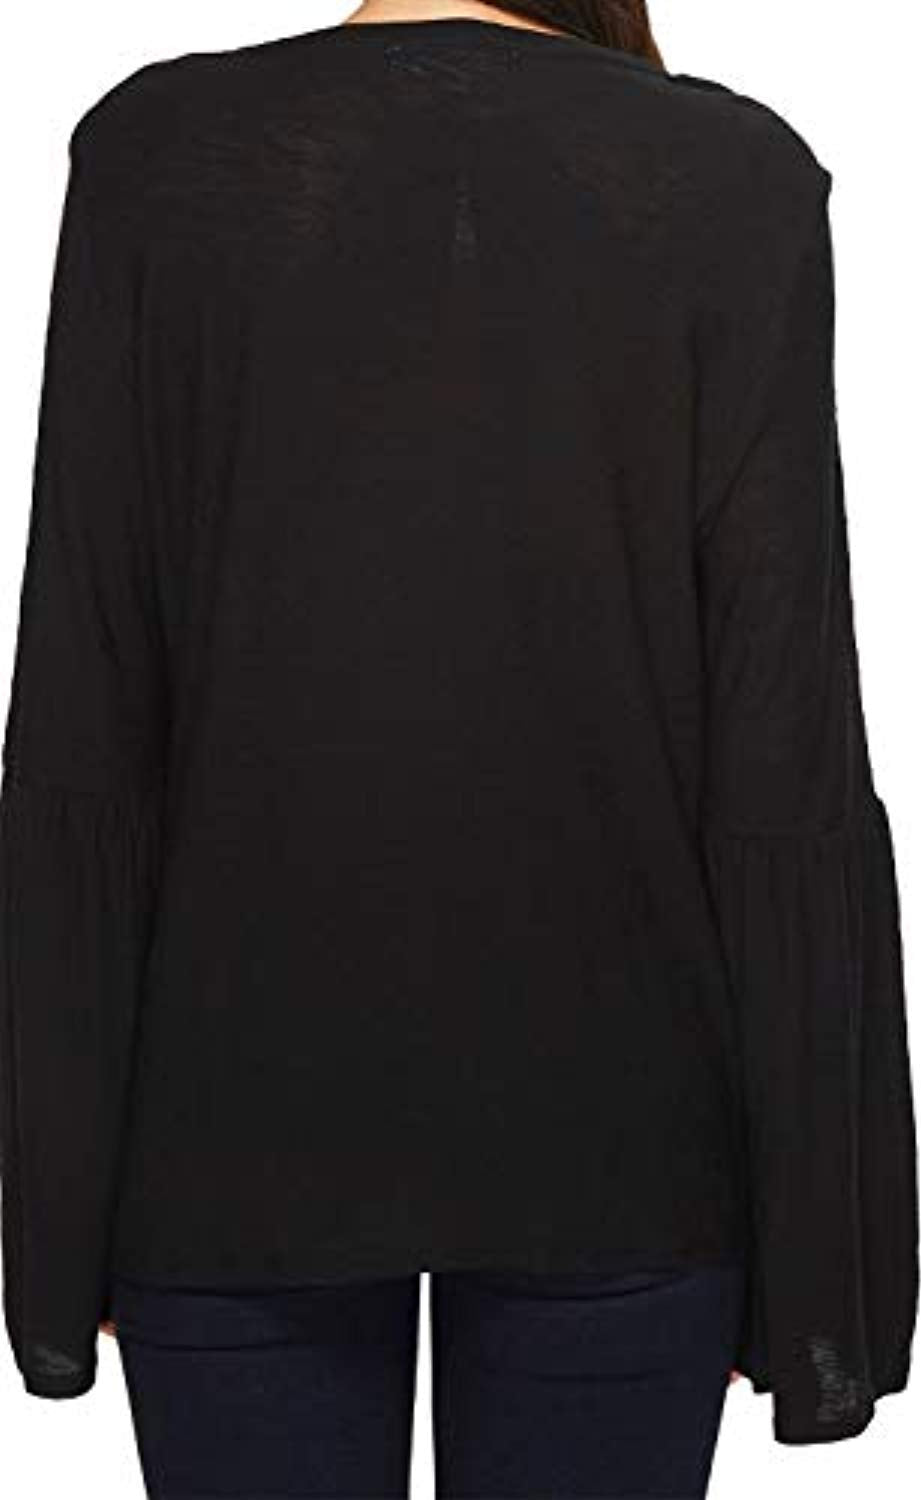 Two by Vince Camuto Womens Bell Sleeve Cotton Modal Slub Top M